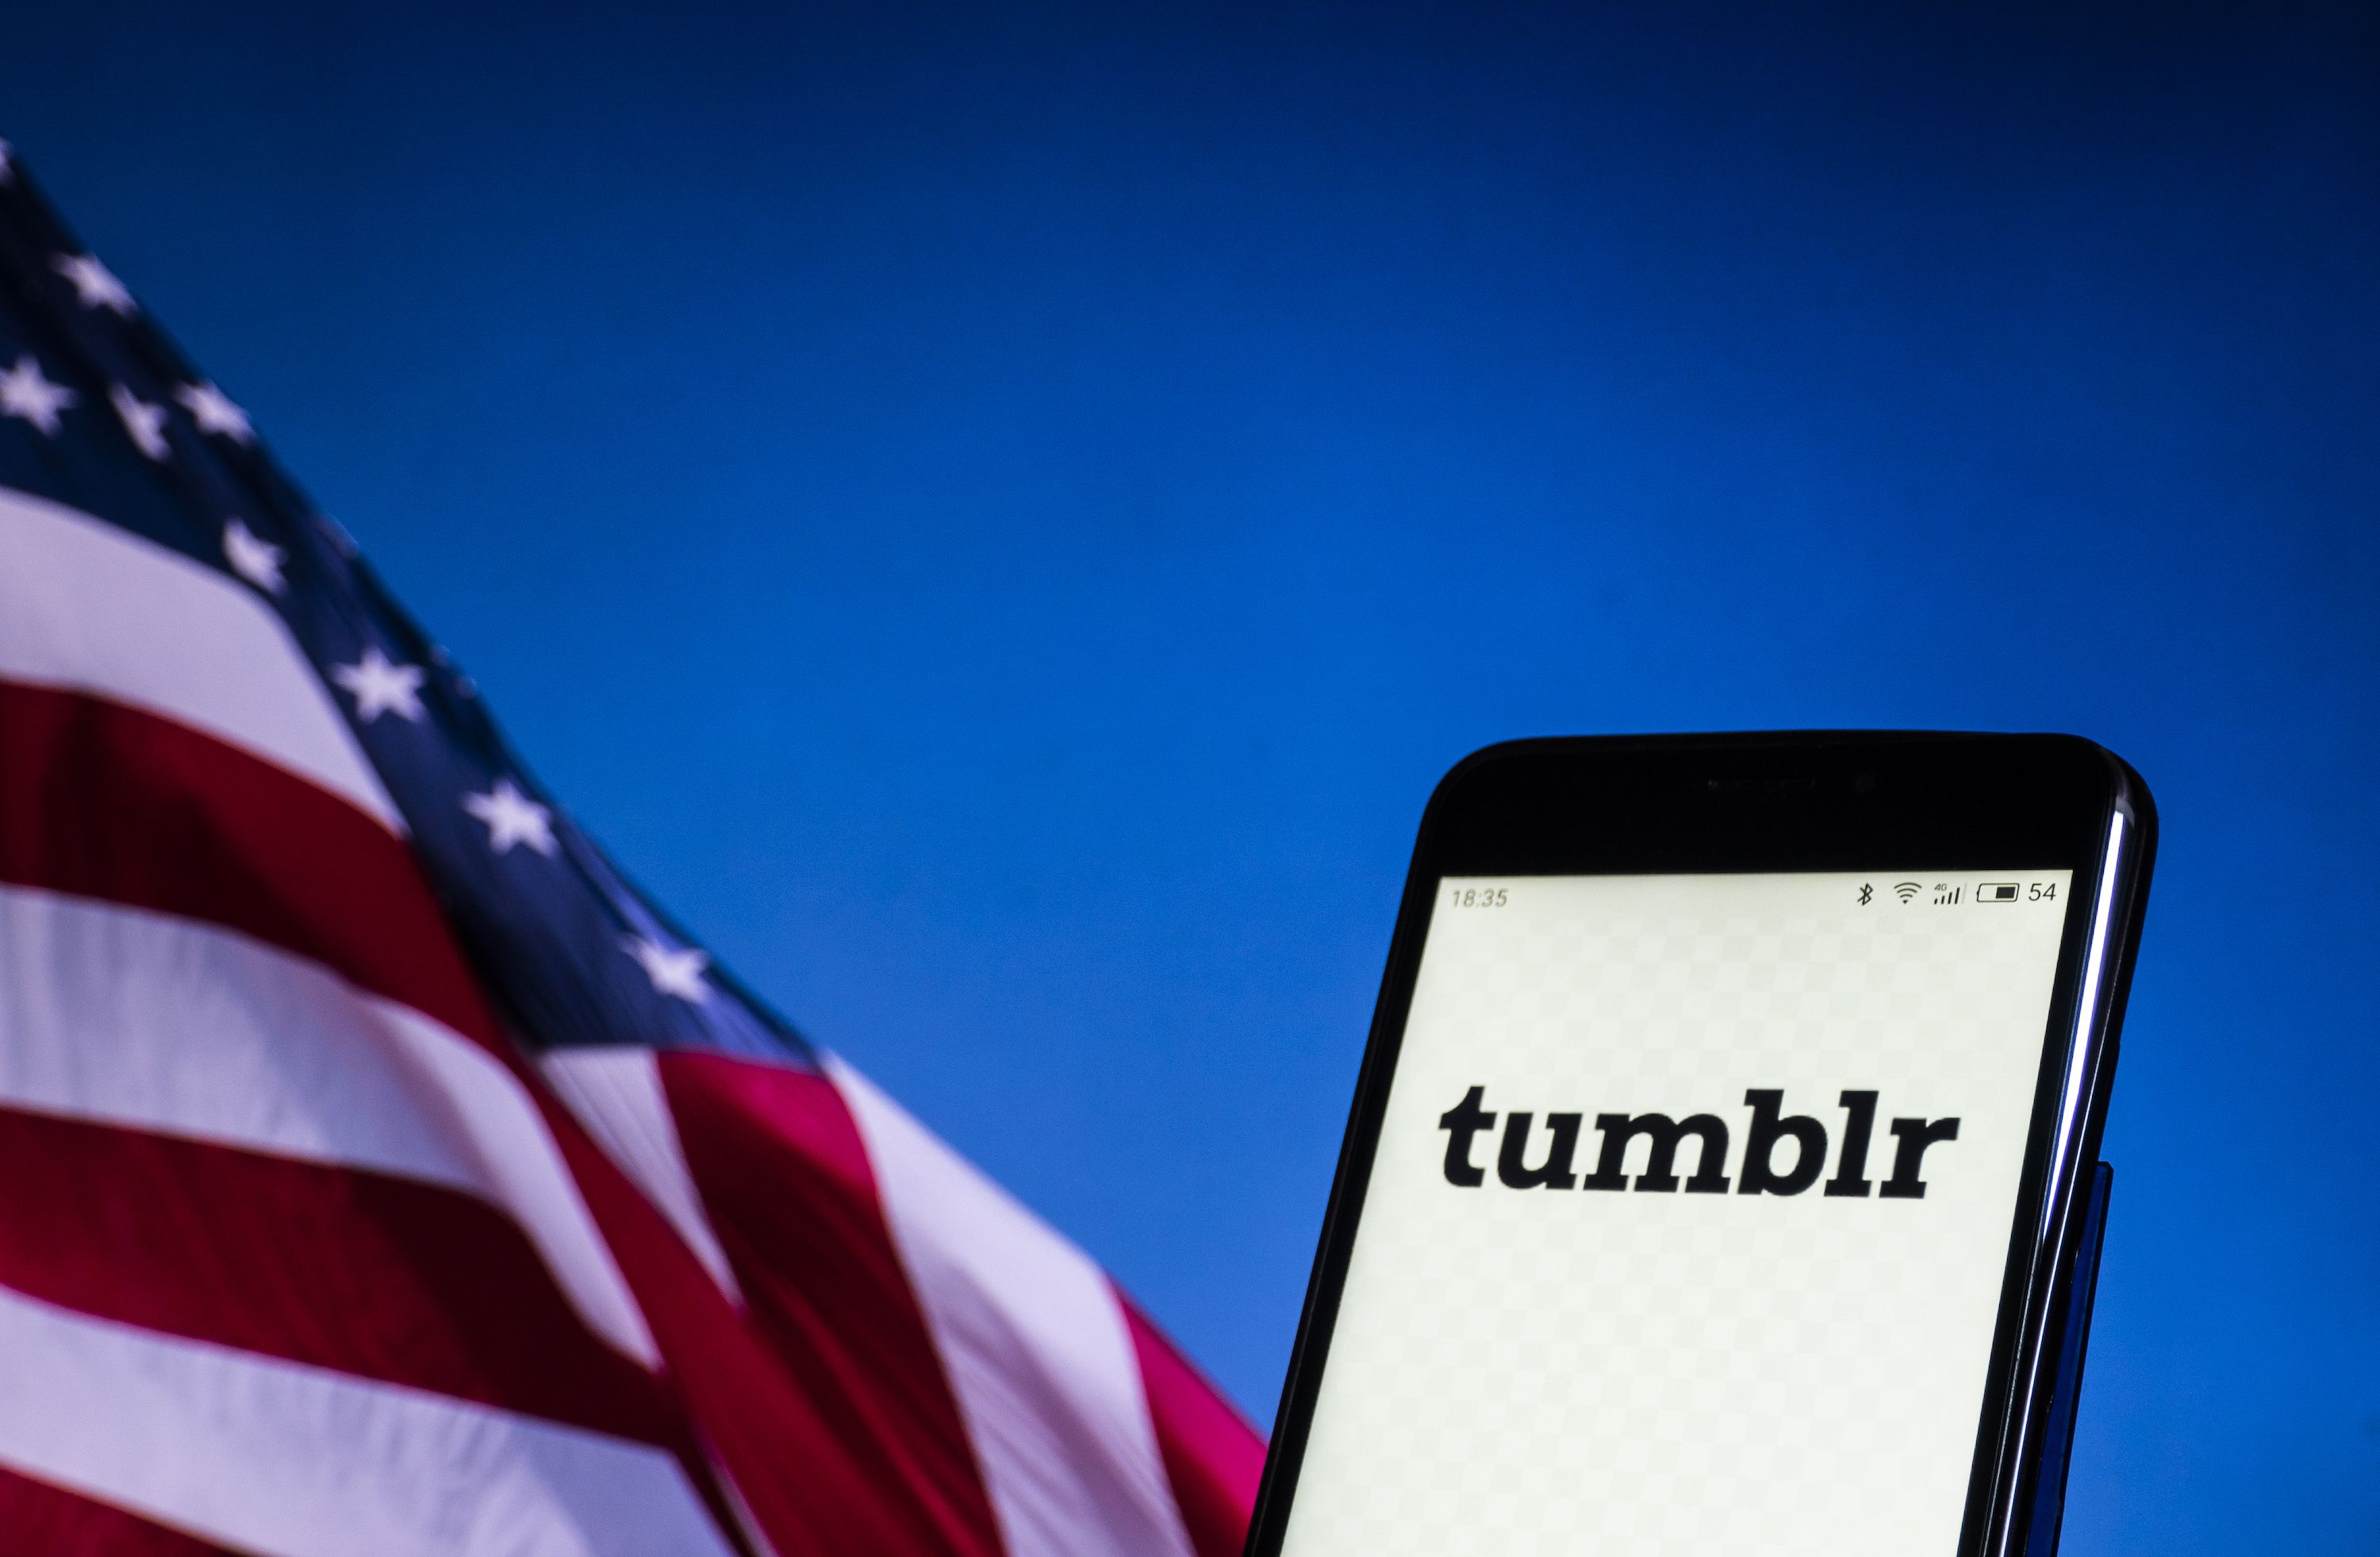 Cool I Guess - Tumblr Is Banning Porn, So I Guess Tumblr Is Dead Now ...